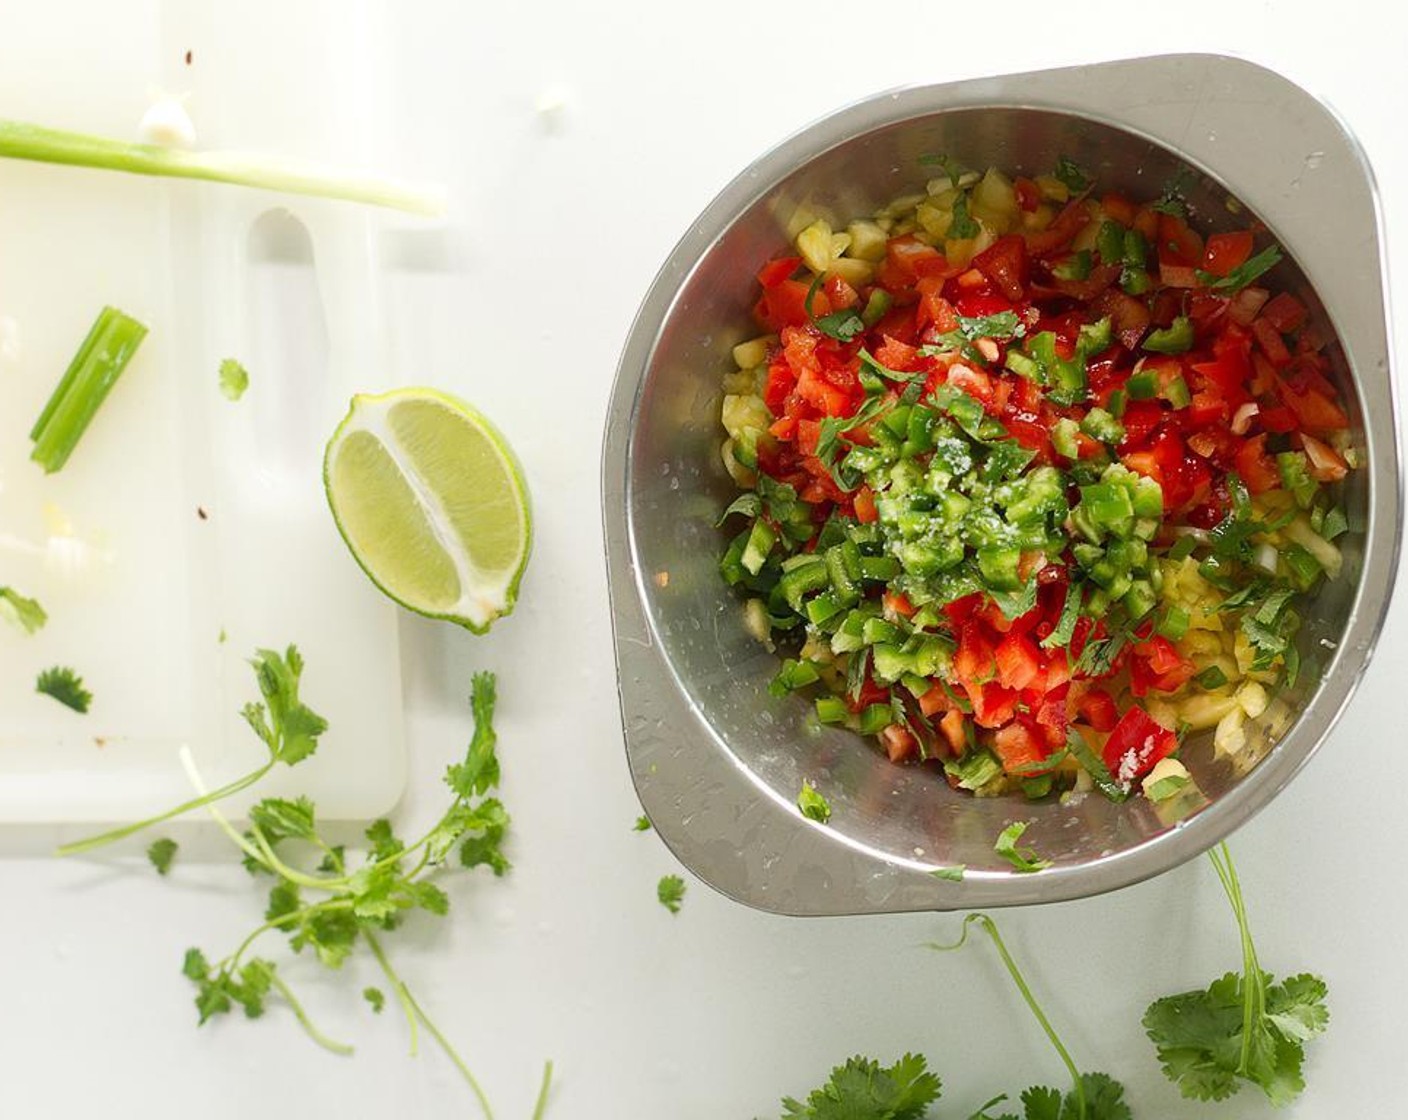 step 4 Combine Canned Diced Pineapple (3 1/3 cups), scallion, red bell pepper, jalapeño pepper, cilantro, the remaining garlic, the remaining Lemon Juice, Chili Powder (1 tsp), Salt (1/4 tsp), and Extra-Virgin Olive Oil (1/2 tsp). Cover and place in the refrigerator overnight.